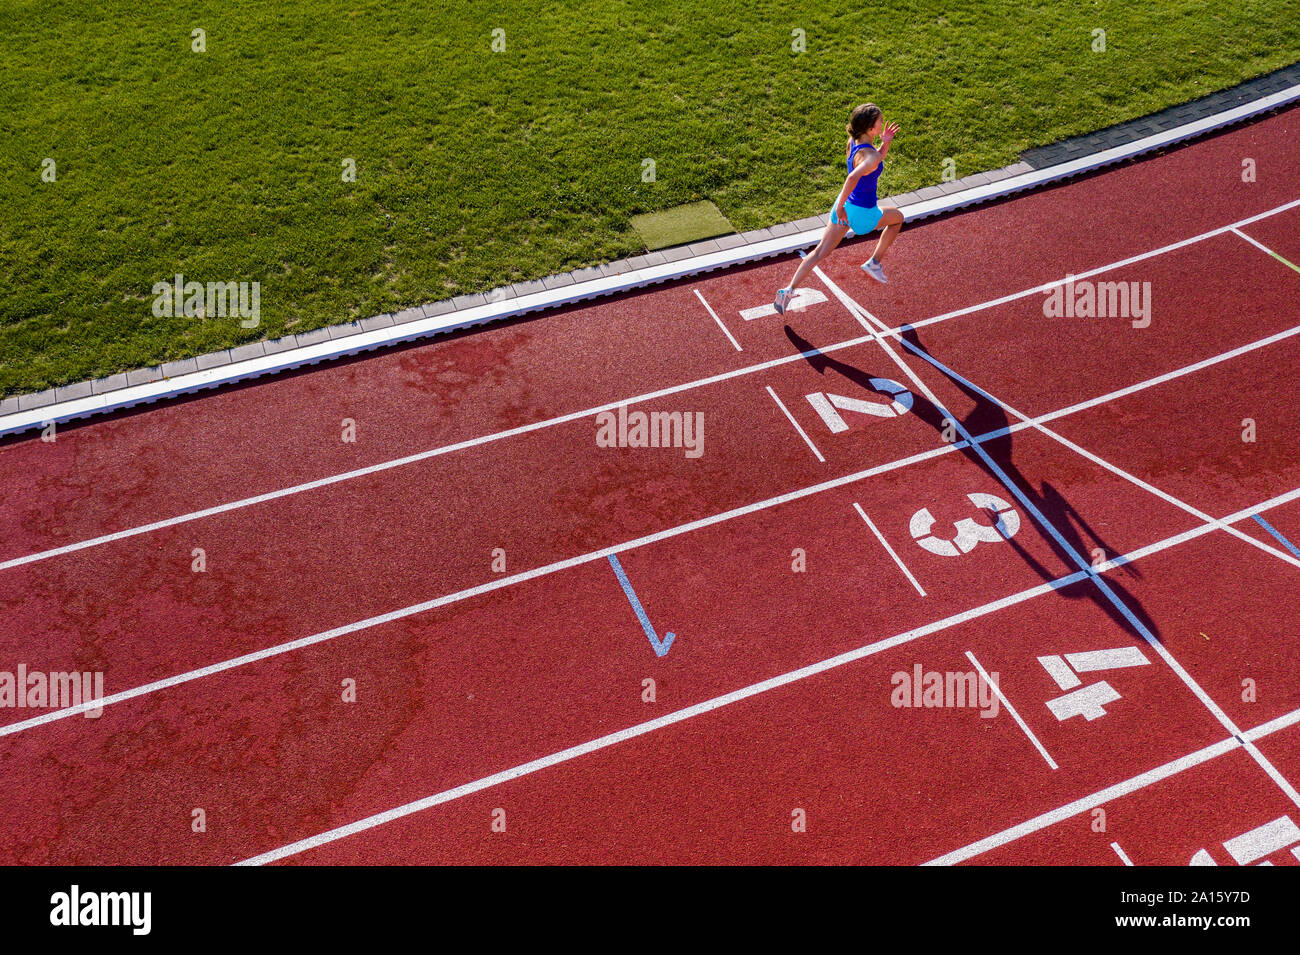 Aerial view of a running young female athlete on a tartan track crossing finishing line Stock Photo